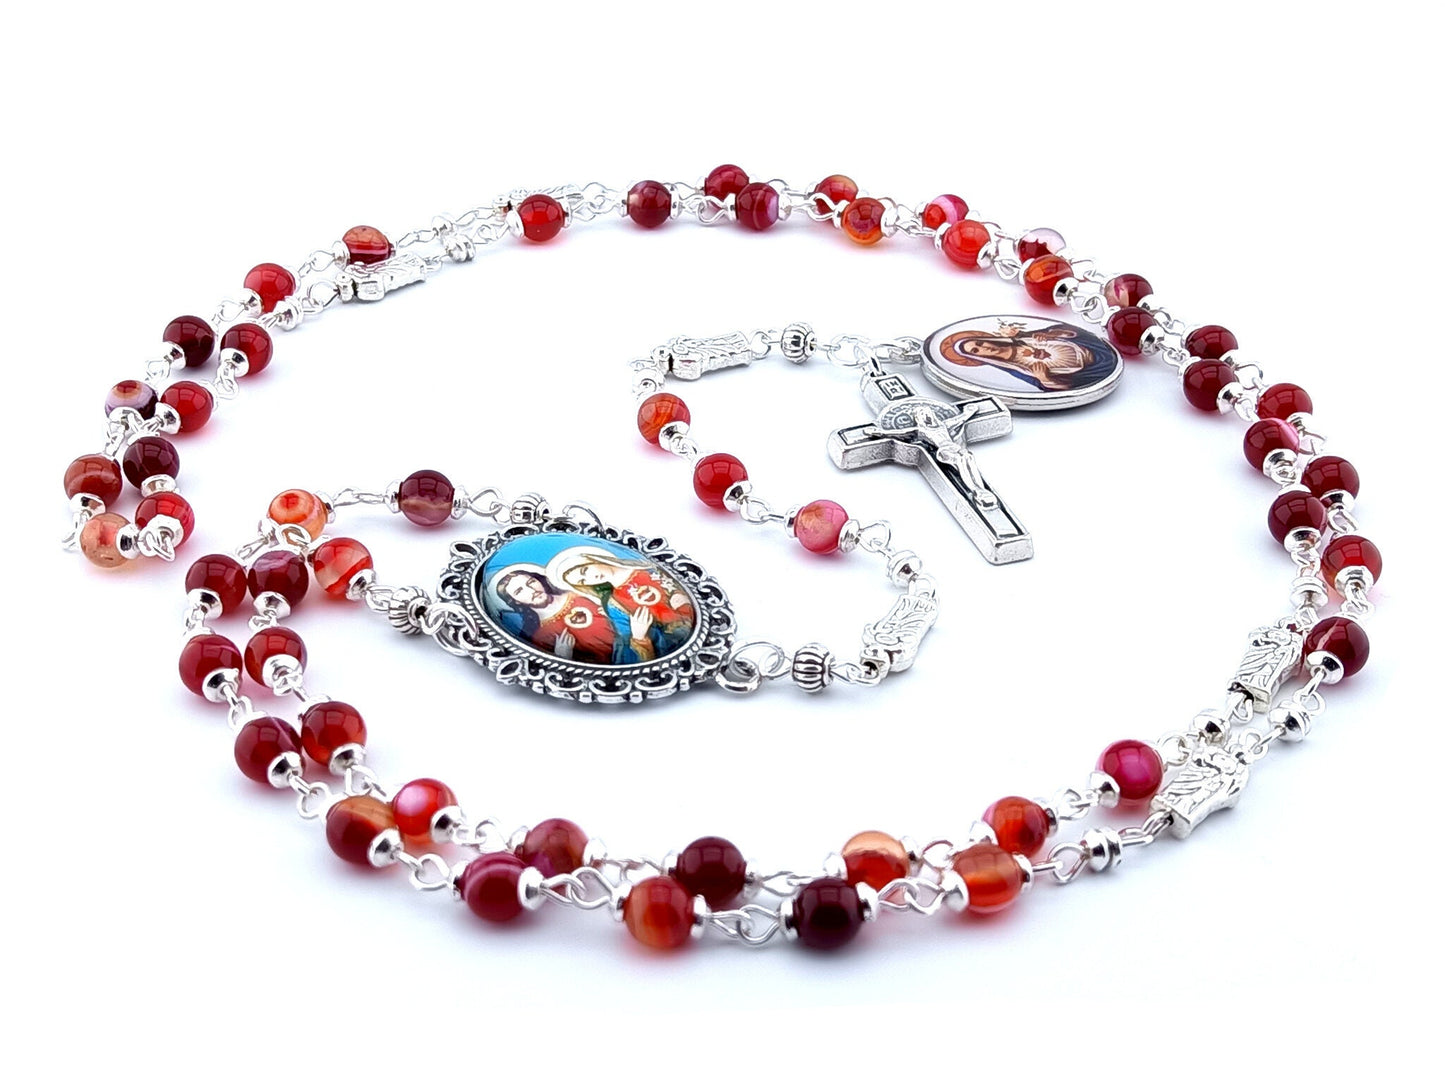 The two Hearts of Jesus and Mary unique rosary beads with red agate gemstone beads, silver Saint Benedict crucifix, picture centre medal and pater beads.